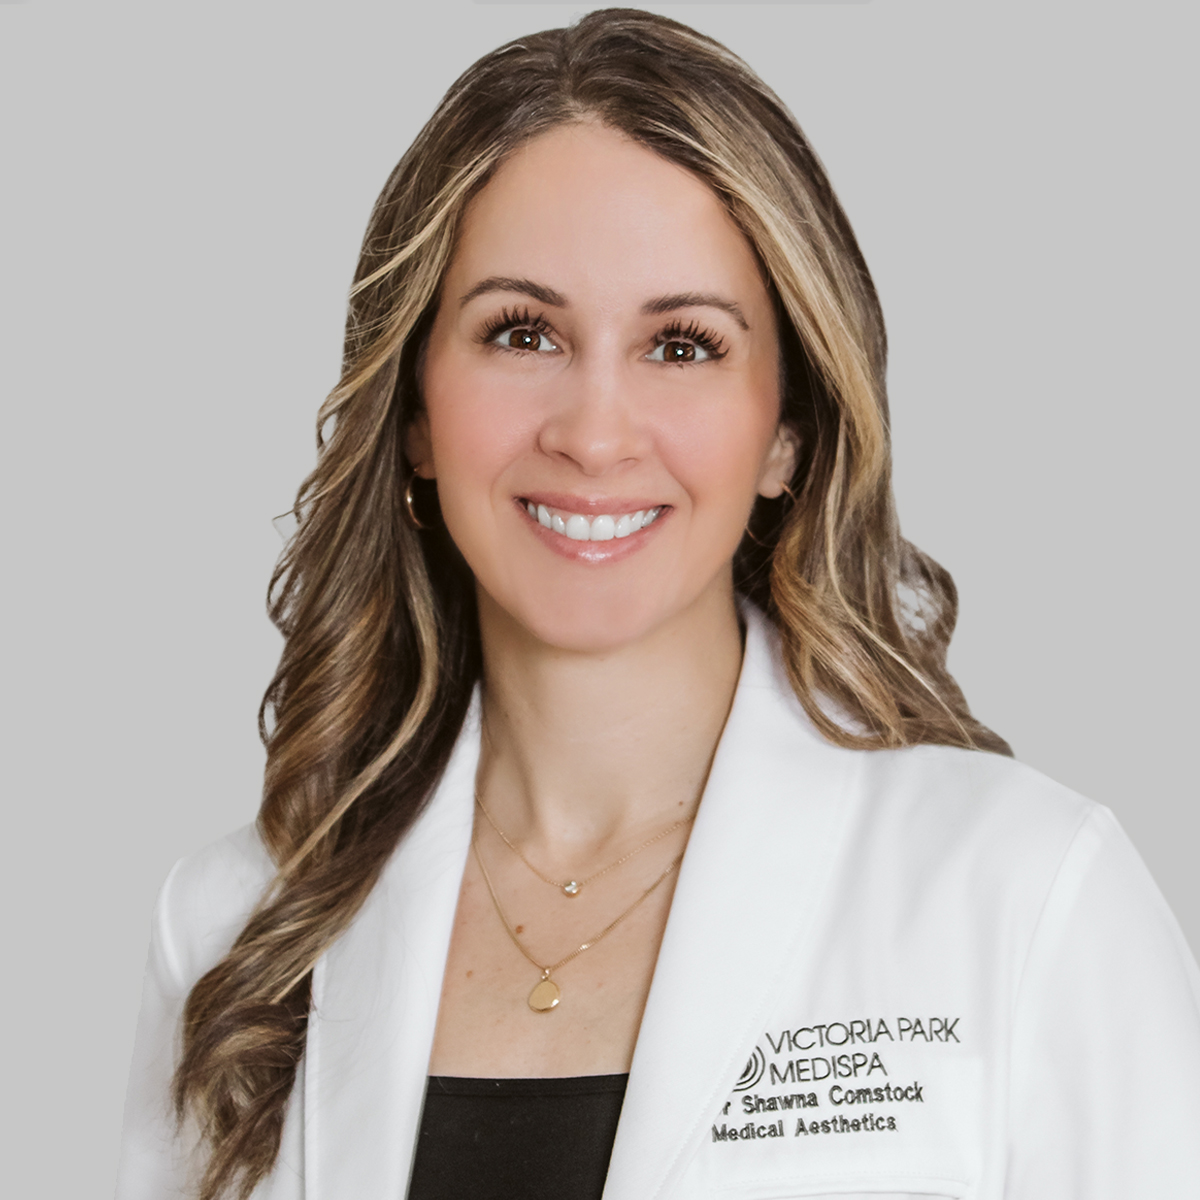 DR. SHAWNA COMSTOCK, GENERAL PRACTITIONER IN BARRIE